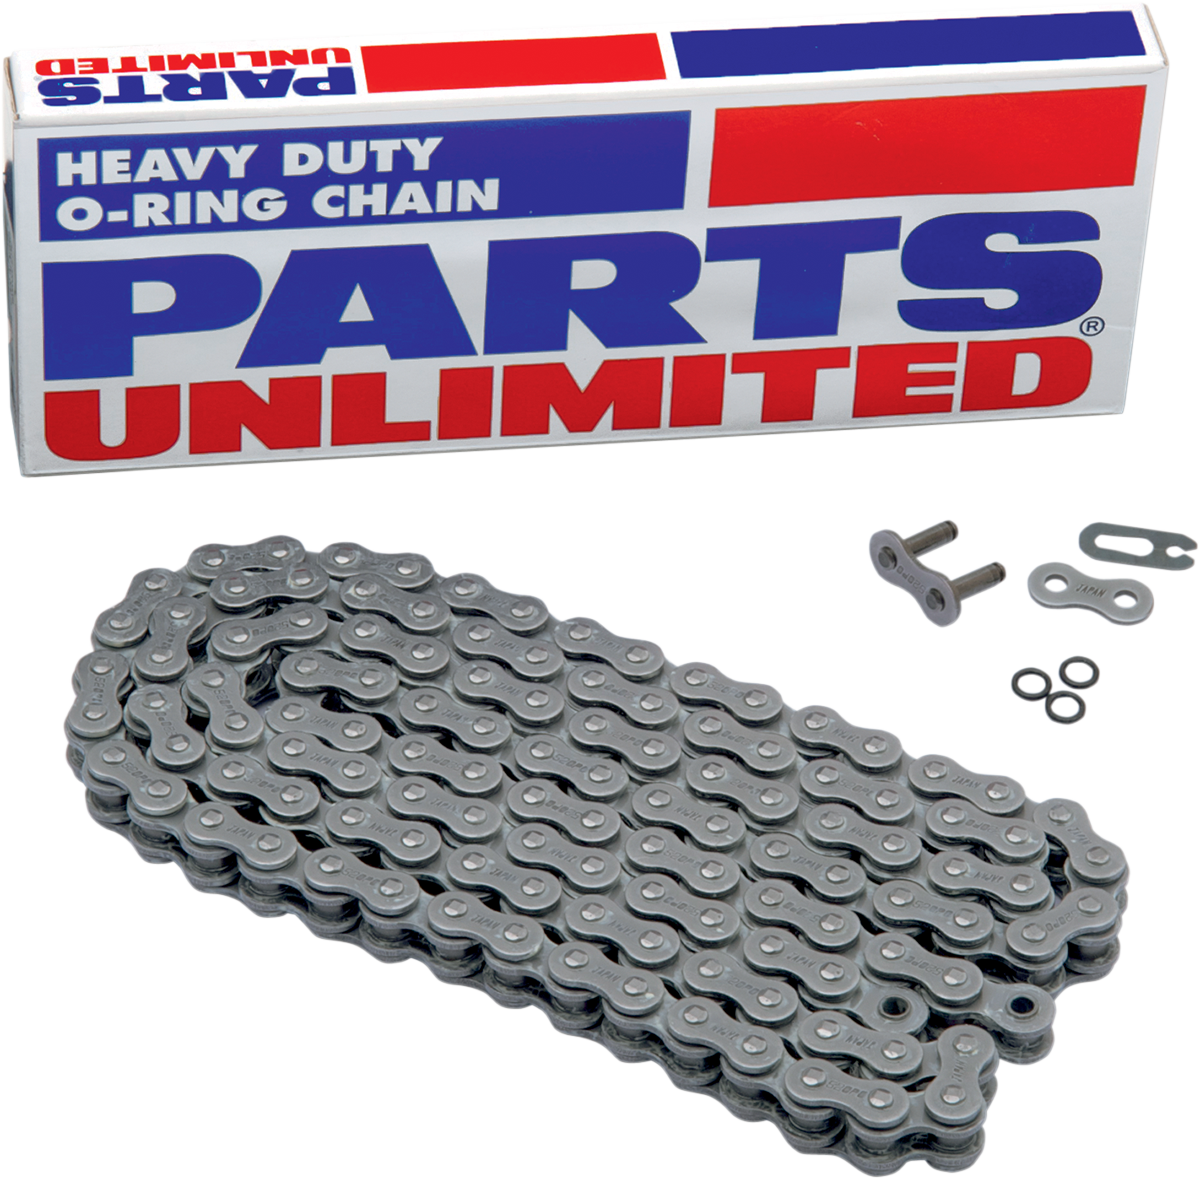 PARTS UNLIMITED-CHAIN MOTORCYCLE CHAIN CHAIN PU 525 X-RING X 25F